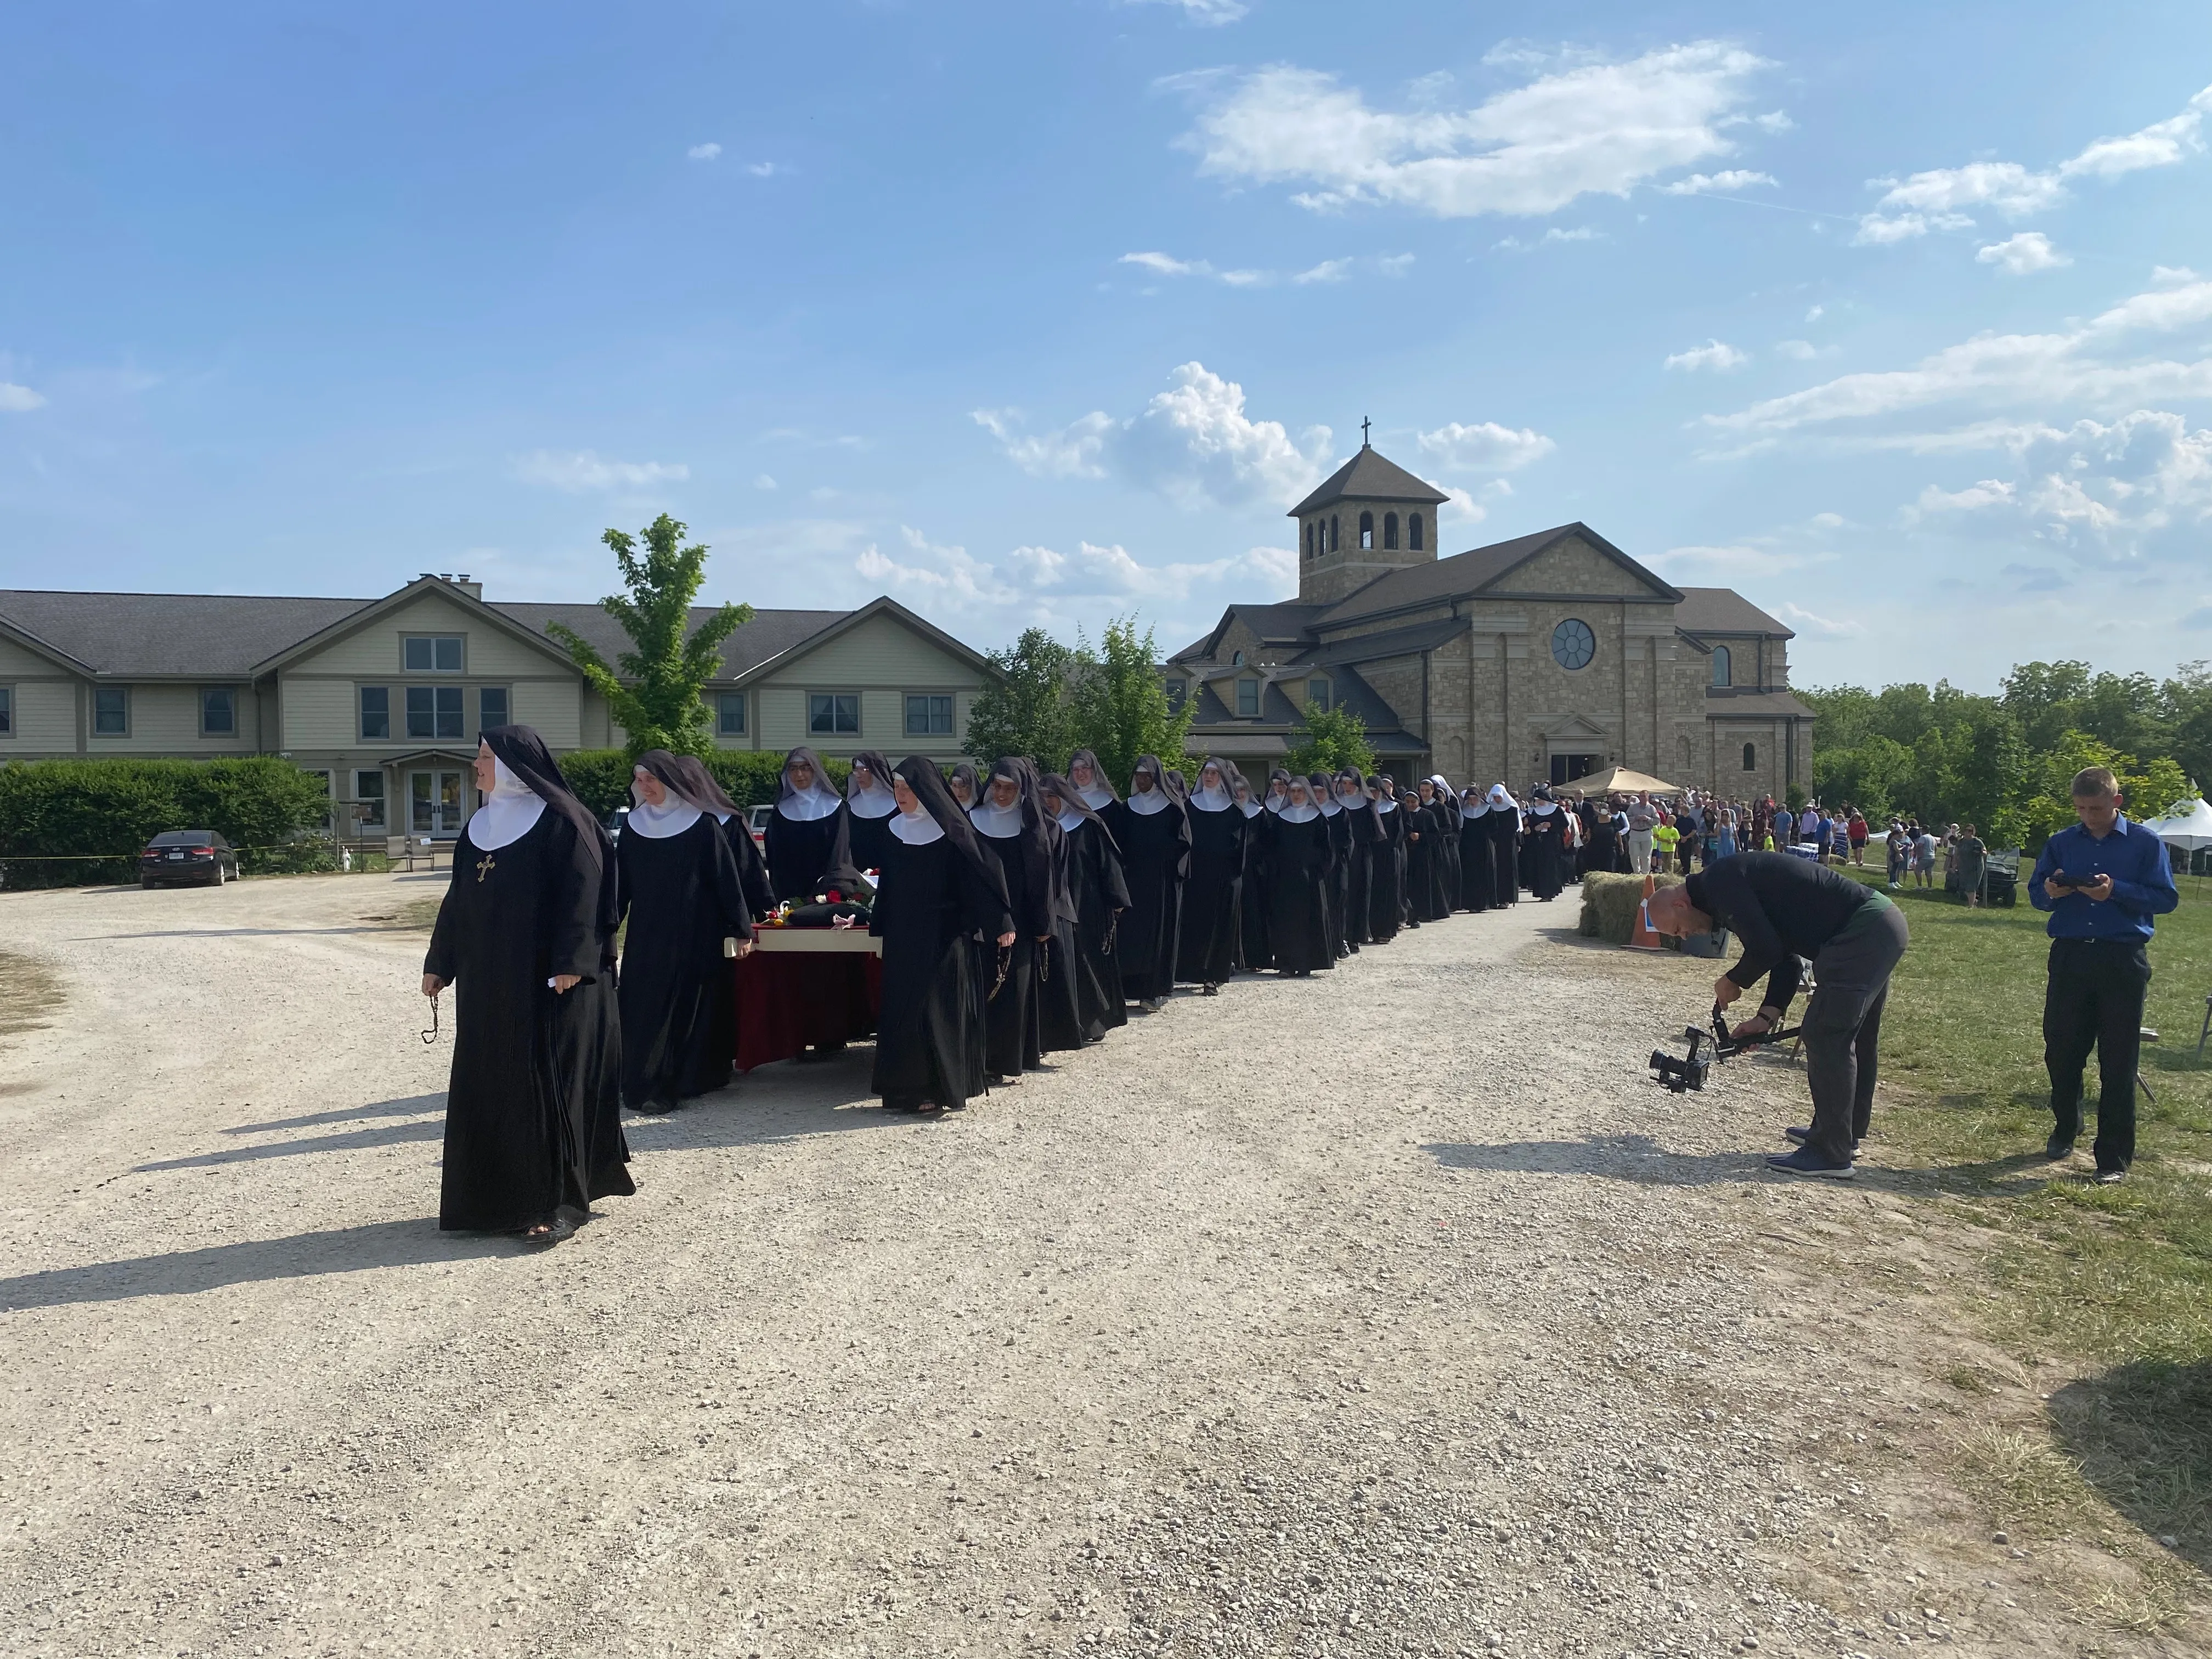 Members of the Benedictines of Mary, Queen of Apostles, lead a procession with the body of their foundress, Sister Wilhelmina Lancaster, at their abbey in Gower, Missouri, on May 29, 2023. Joe Bukuras/CNA